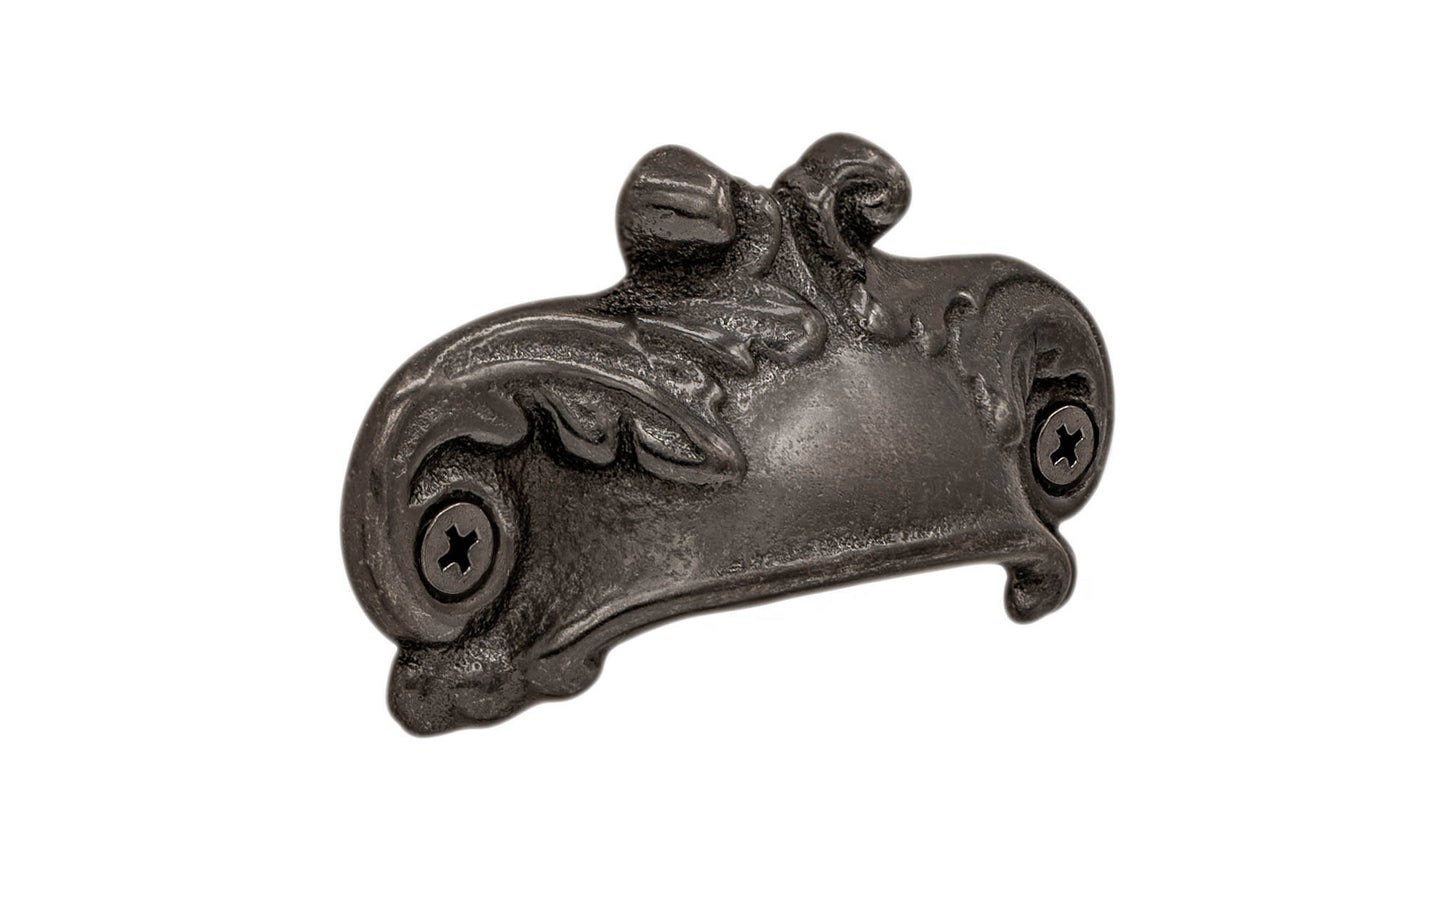 Rustic-looking & ornate cast iron bin pull with a nice scroll pattern detail. Made of cast iron material, this bin pull is thick with a good grip. This old-style bin pull is great for adding charm to your cabinets & drawers. Vintage-style finish with lacquer to resist rust. Scroll Pattern Bin Pull ~ 3-1/8" on Centers